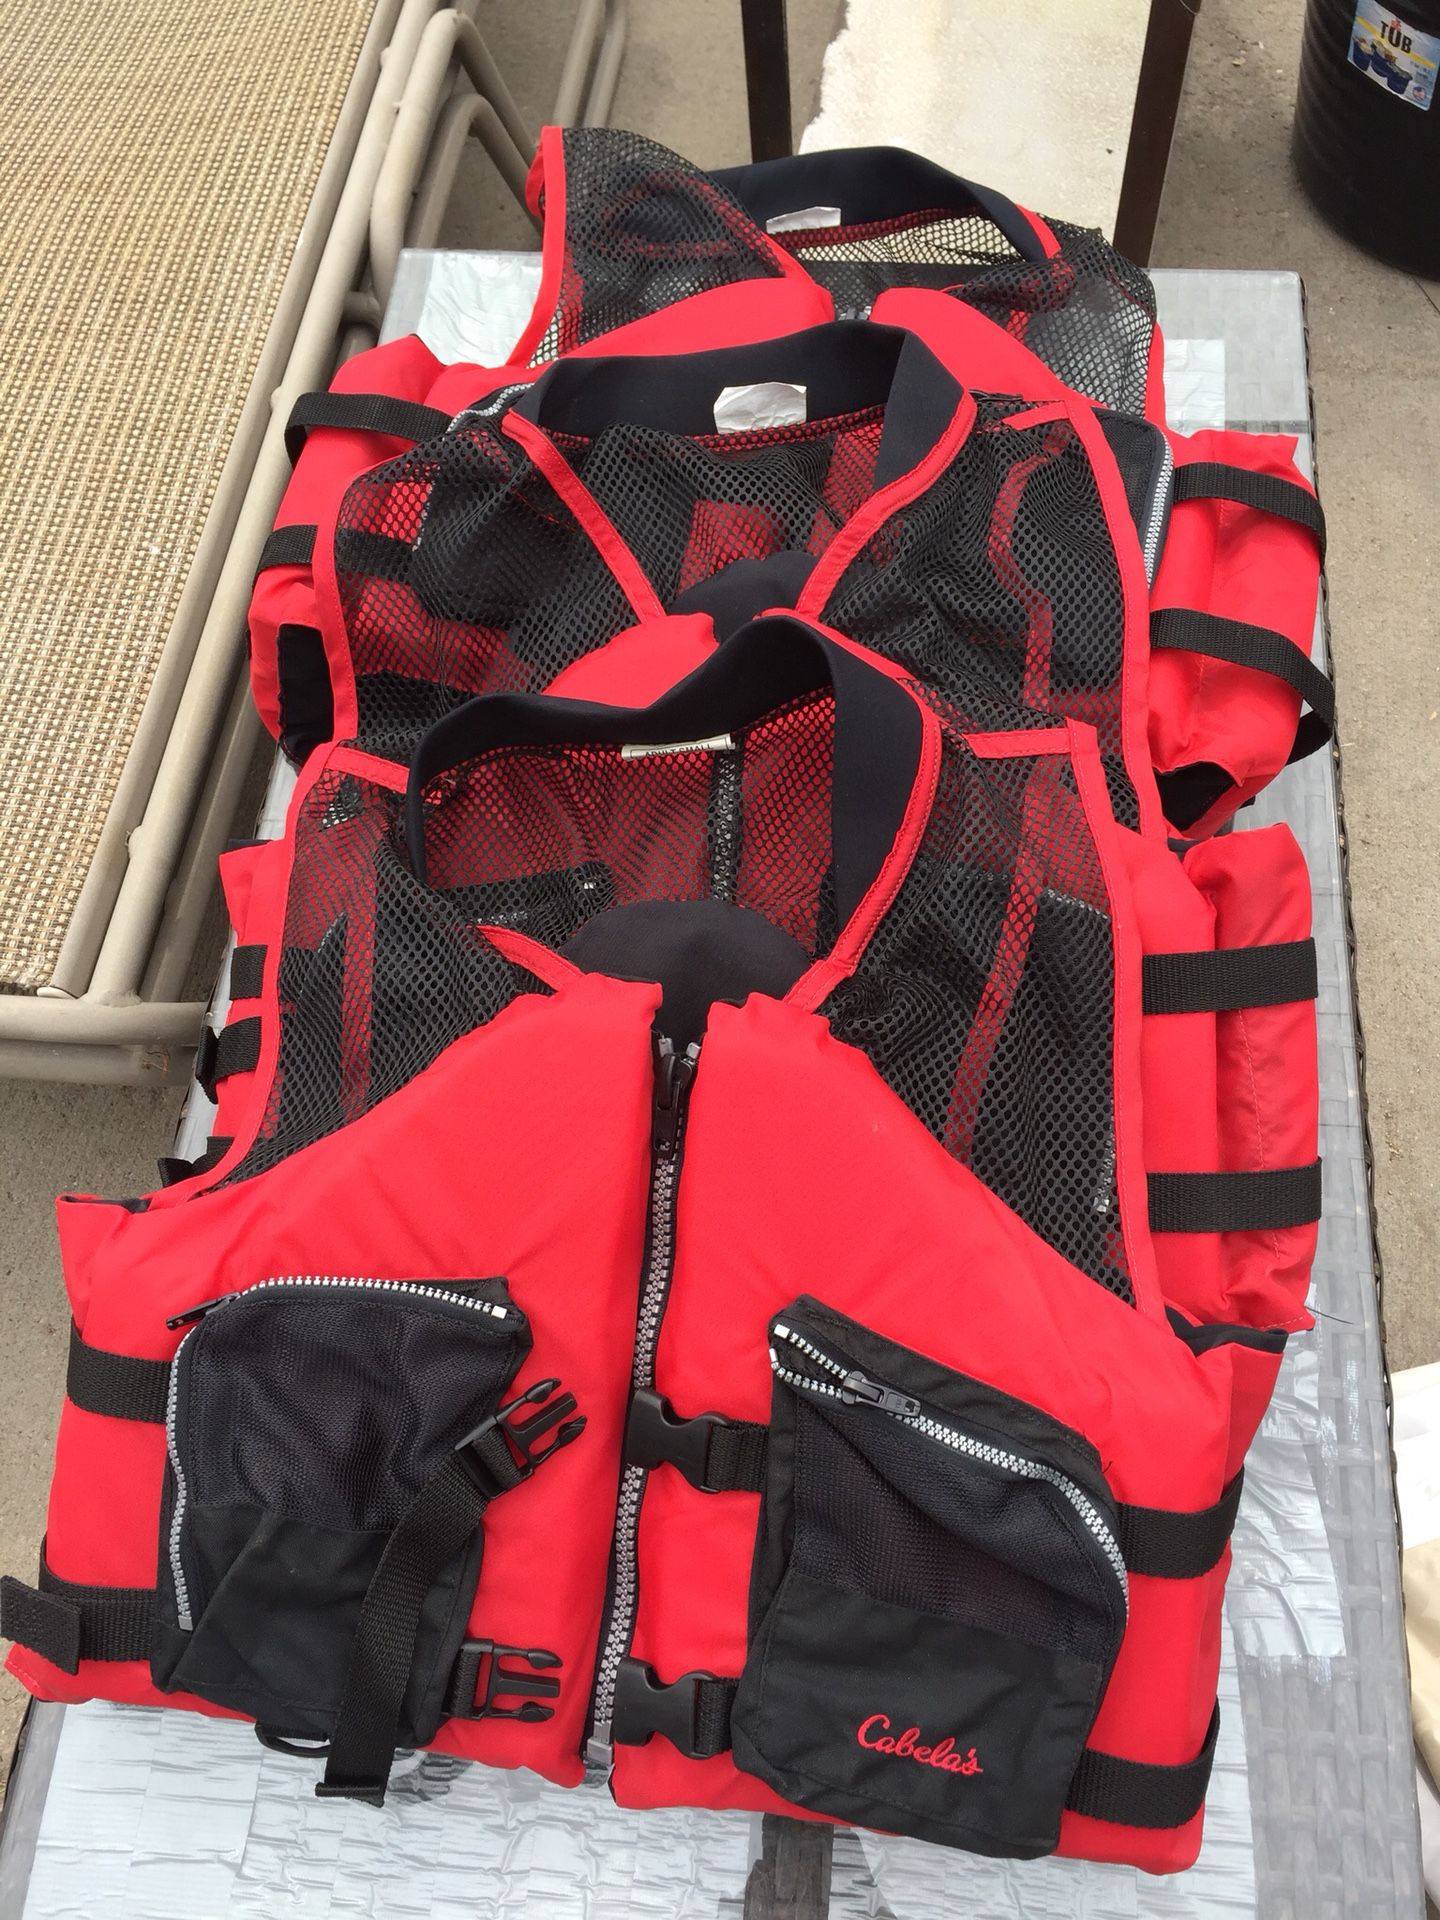 Adult Life vests from Cabela’s